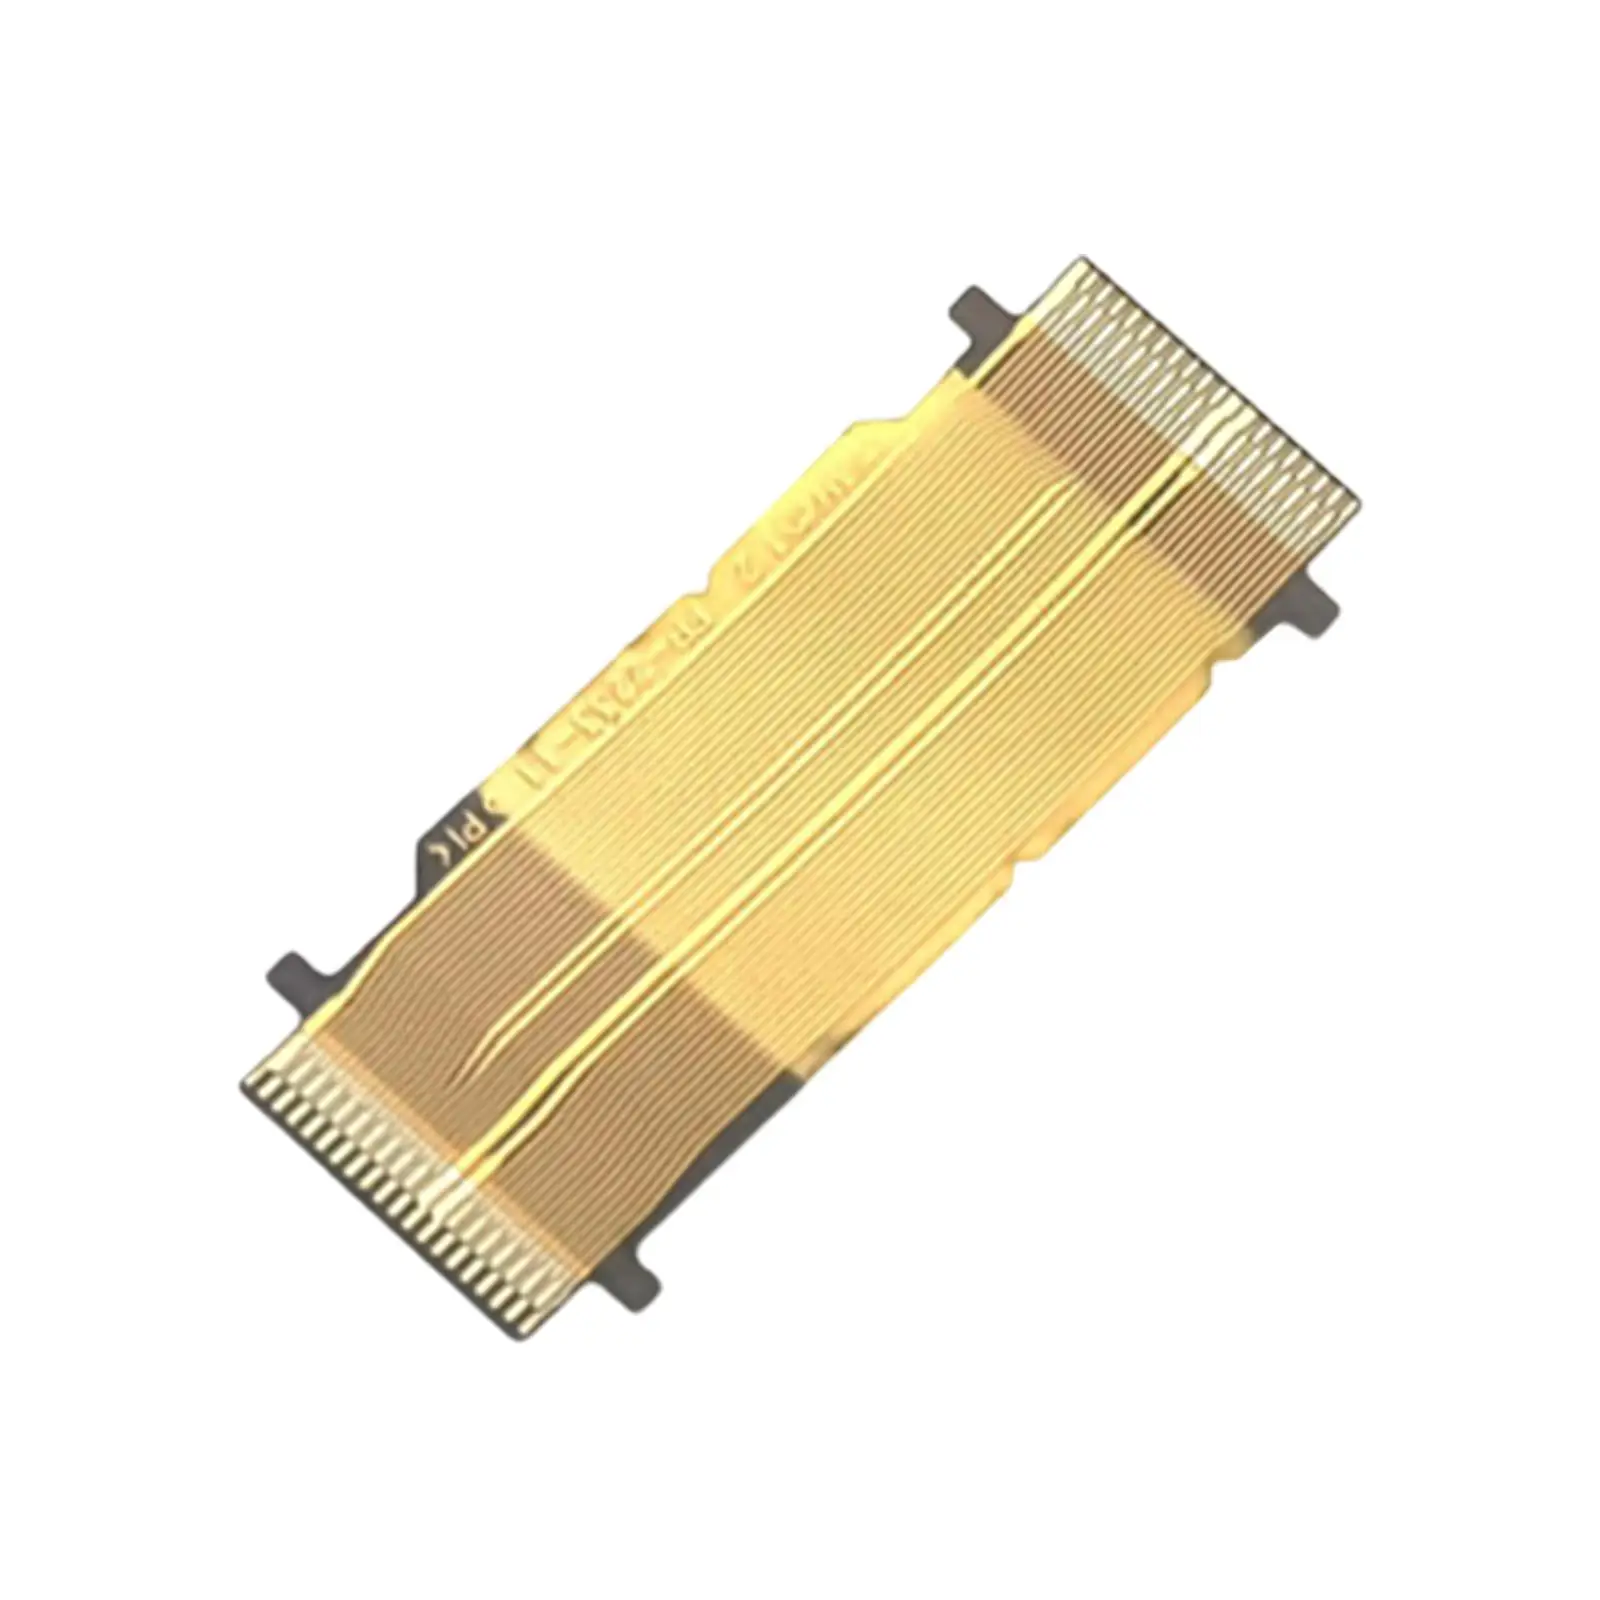 Motherboard Mainboard Connector Flex Cable Fpc Flashing Interface Board Flex Cable for Dsc RX100M3 Fittings Direct Replaces